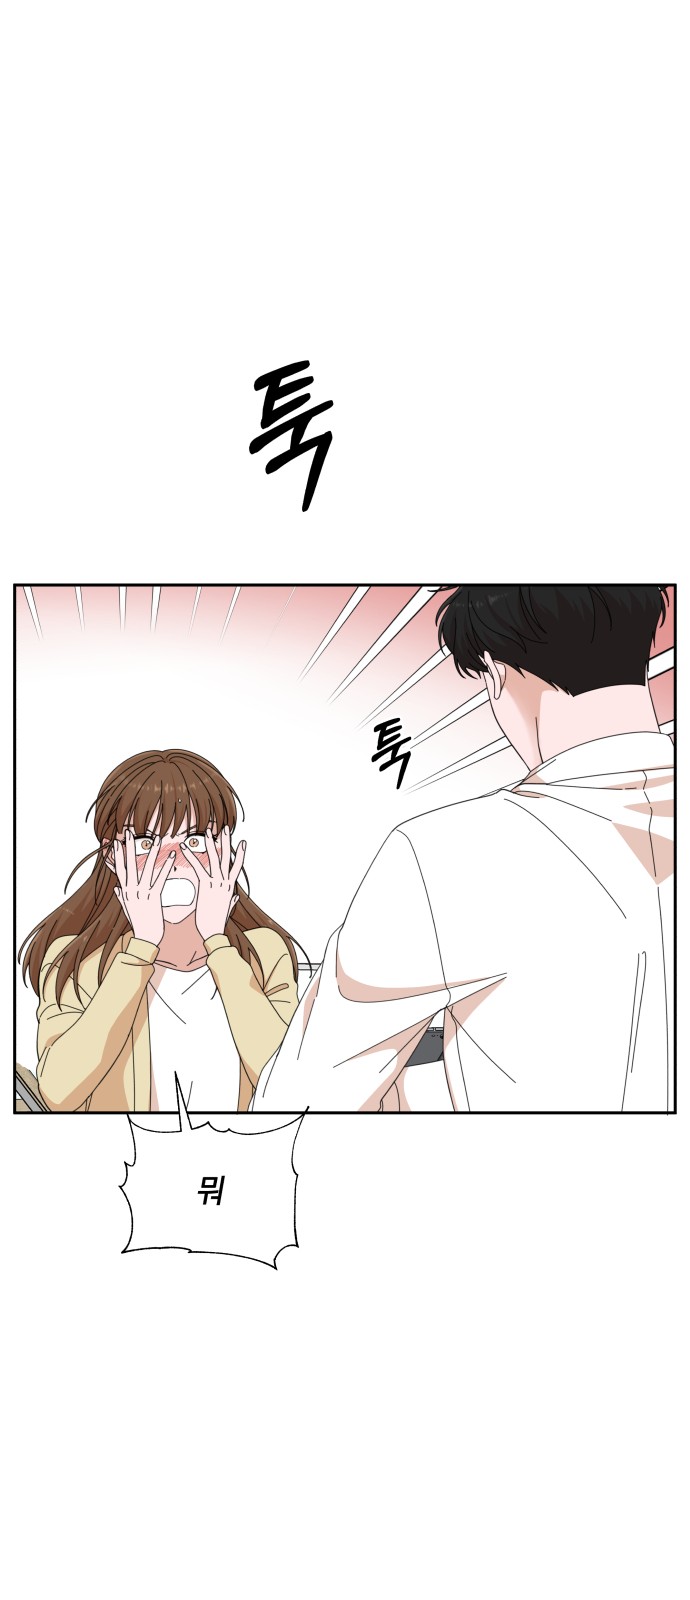 The Man With Pretty Lips - Chapter 23 - Page 1